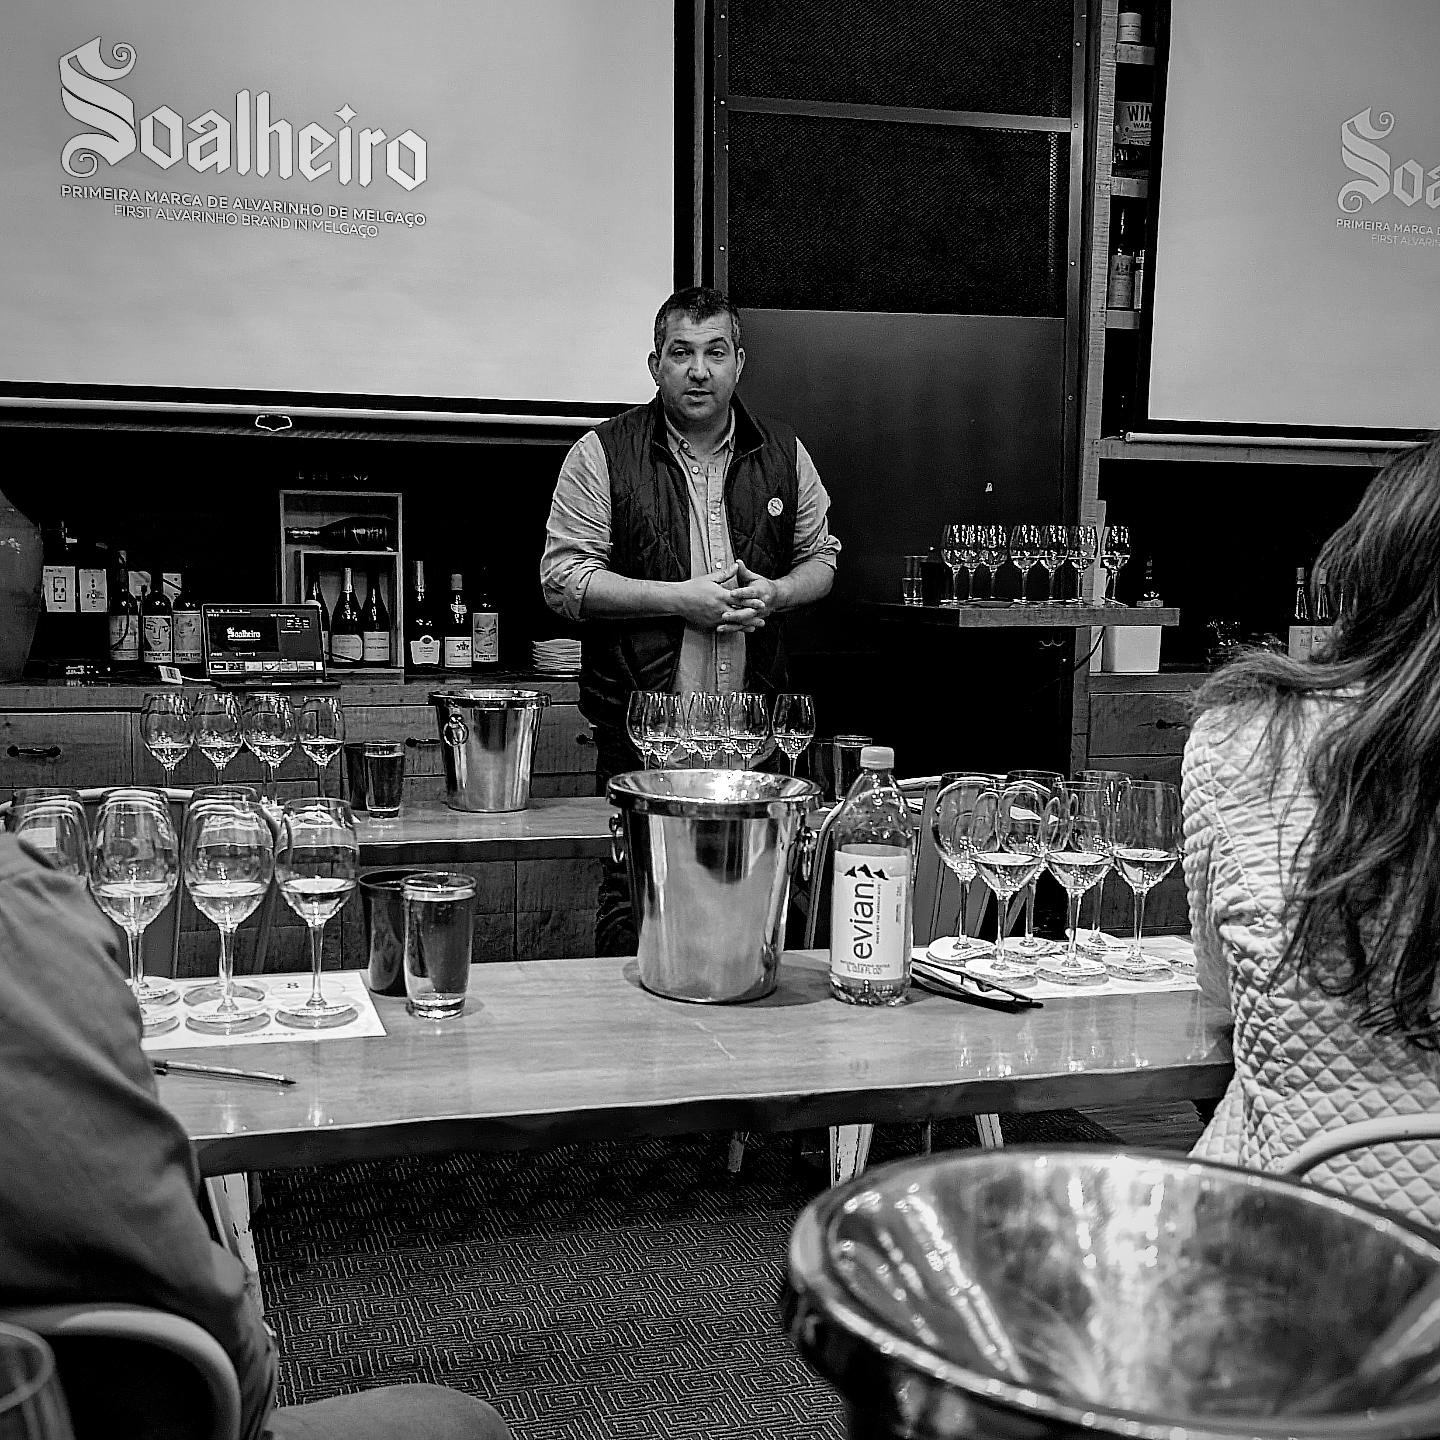 What a way to end the week with Luis of @quinta_soalheiro who talked about the region where his wines come from as well as.rheir focus #styledirector #creativedirector #teampixel